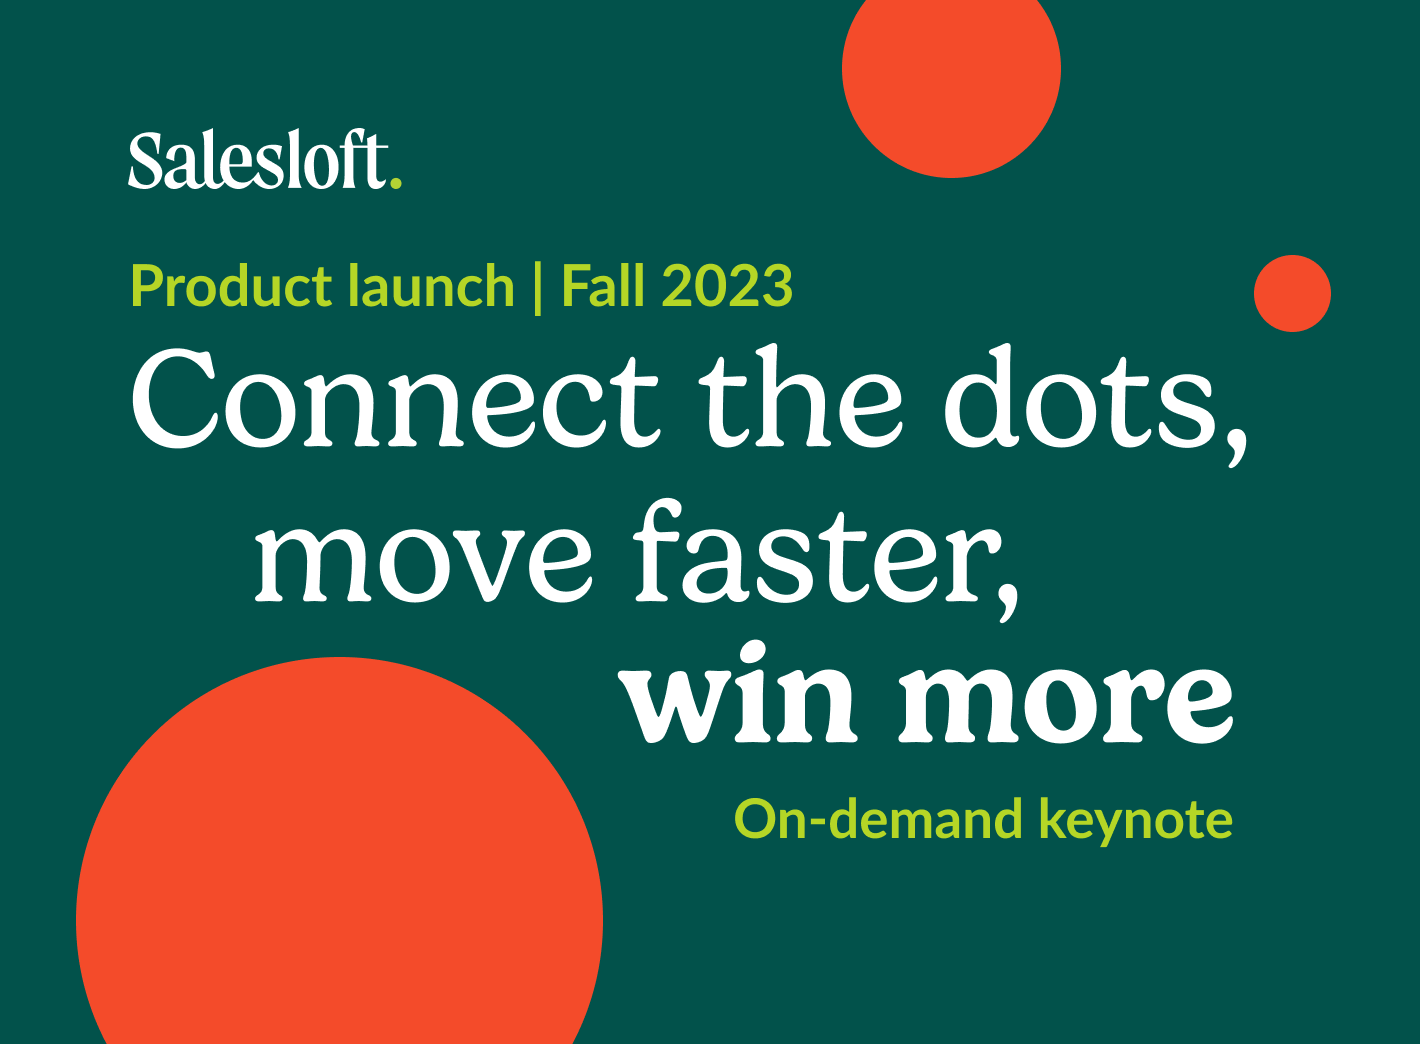 Saleslove Austin keynote livestream: Connect the dots, move faster, win more